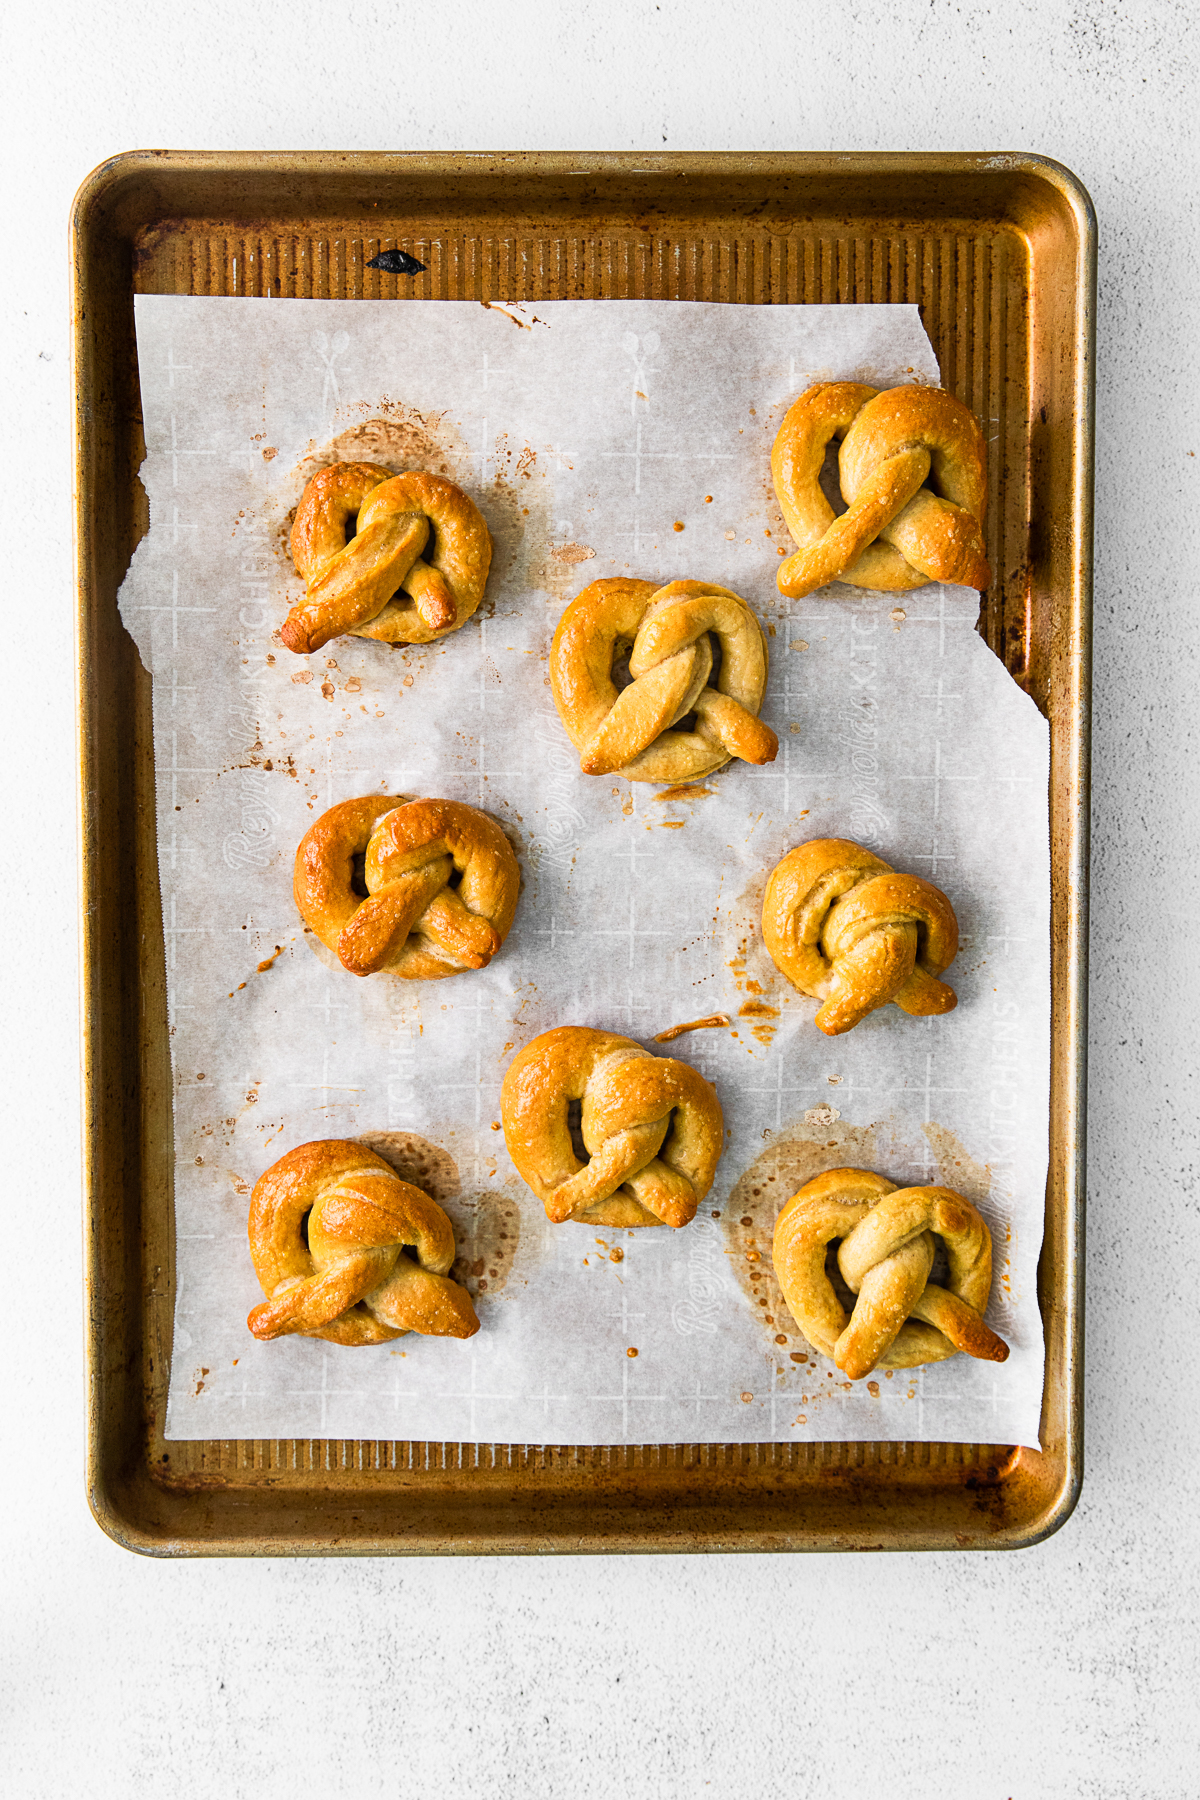 Cooked soft pretzels on a baking tray. 